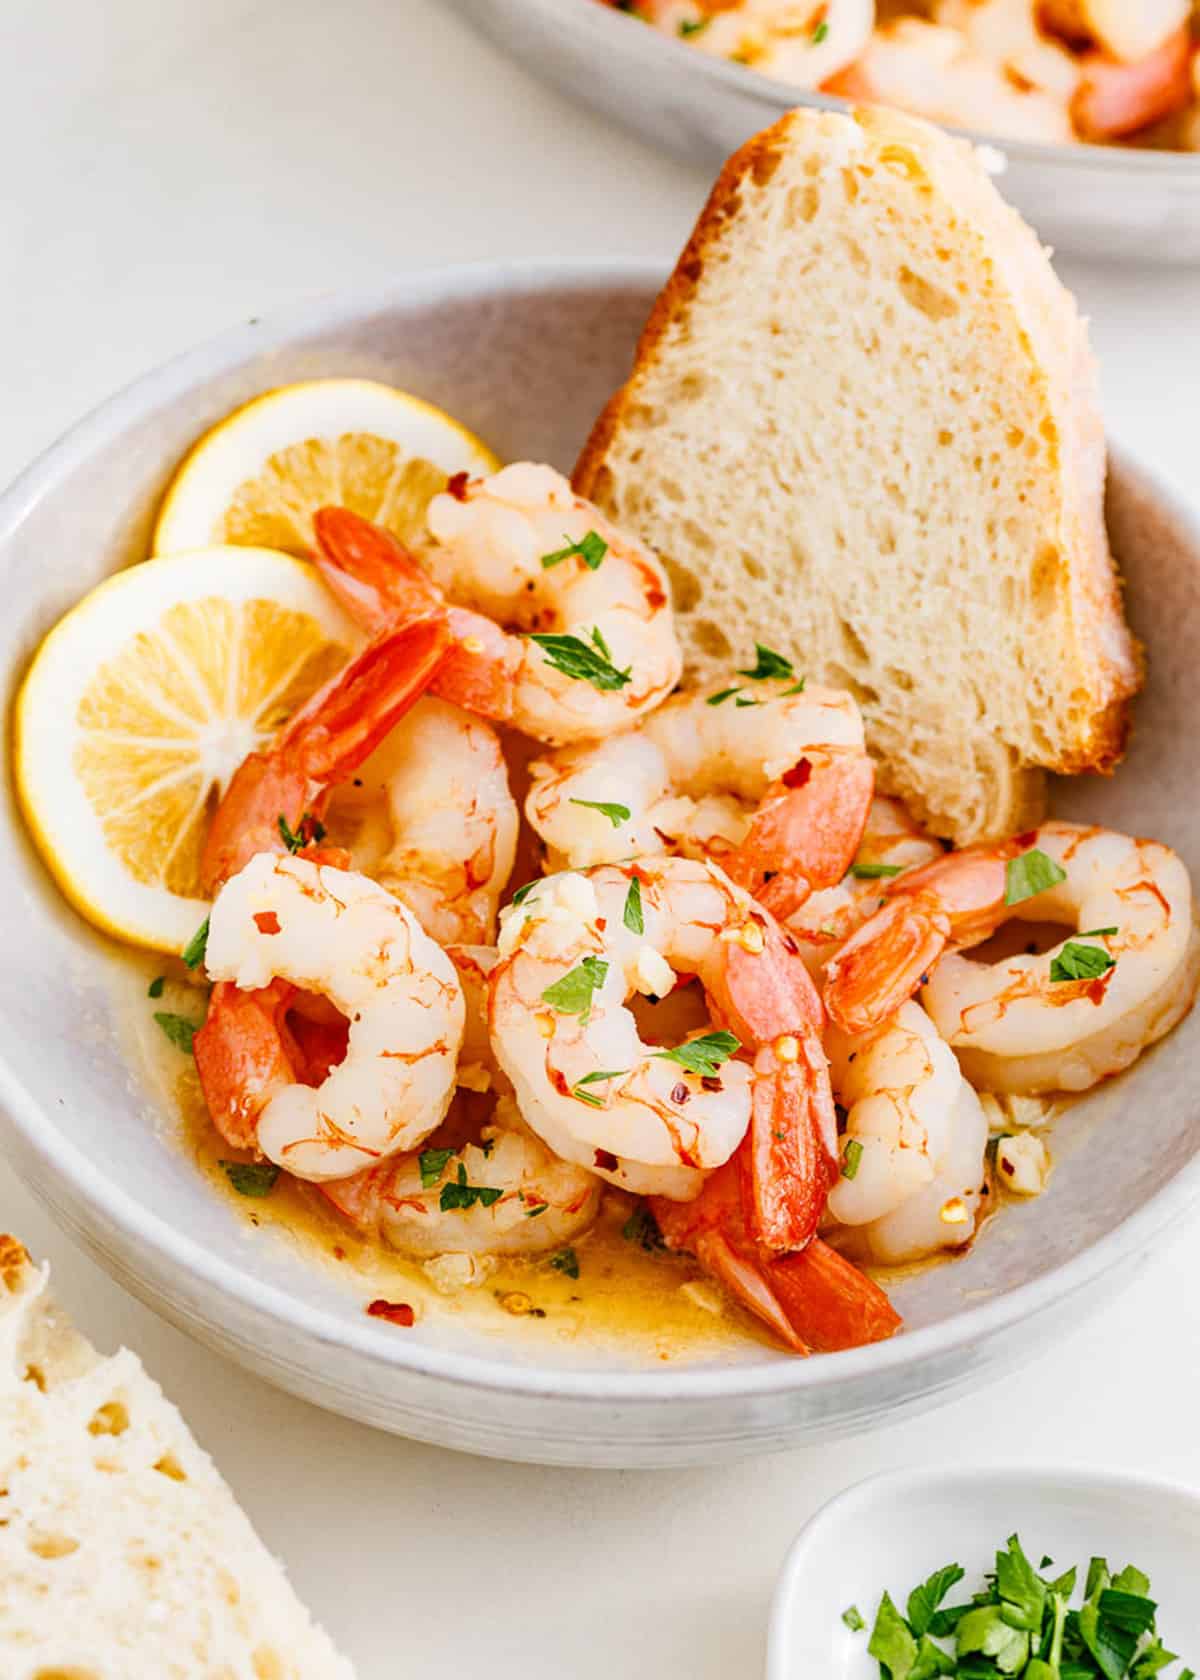 Shrimp scampi in a white bowl with bread.